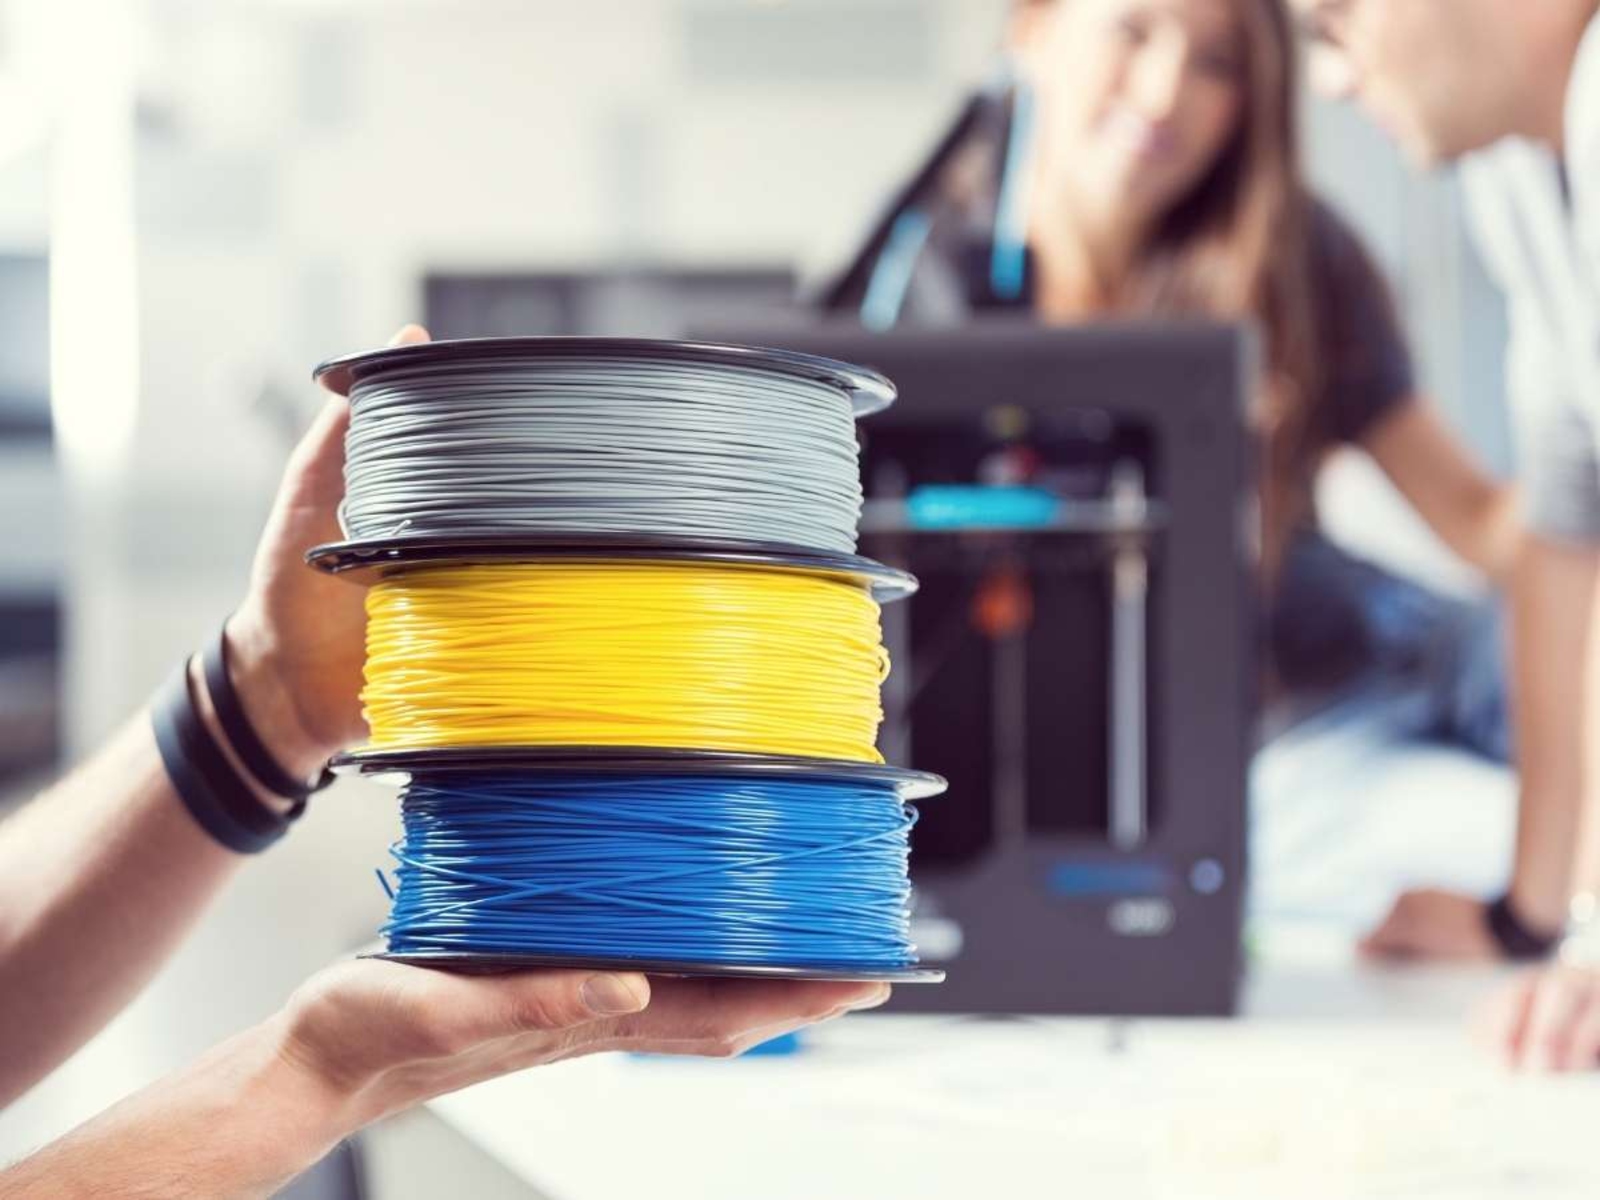 What Is The Material Used In 3D Printing